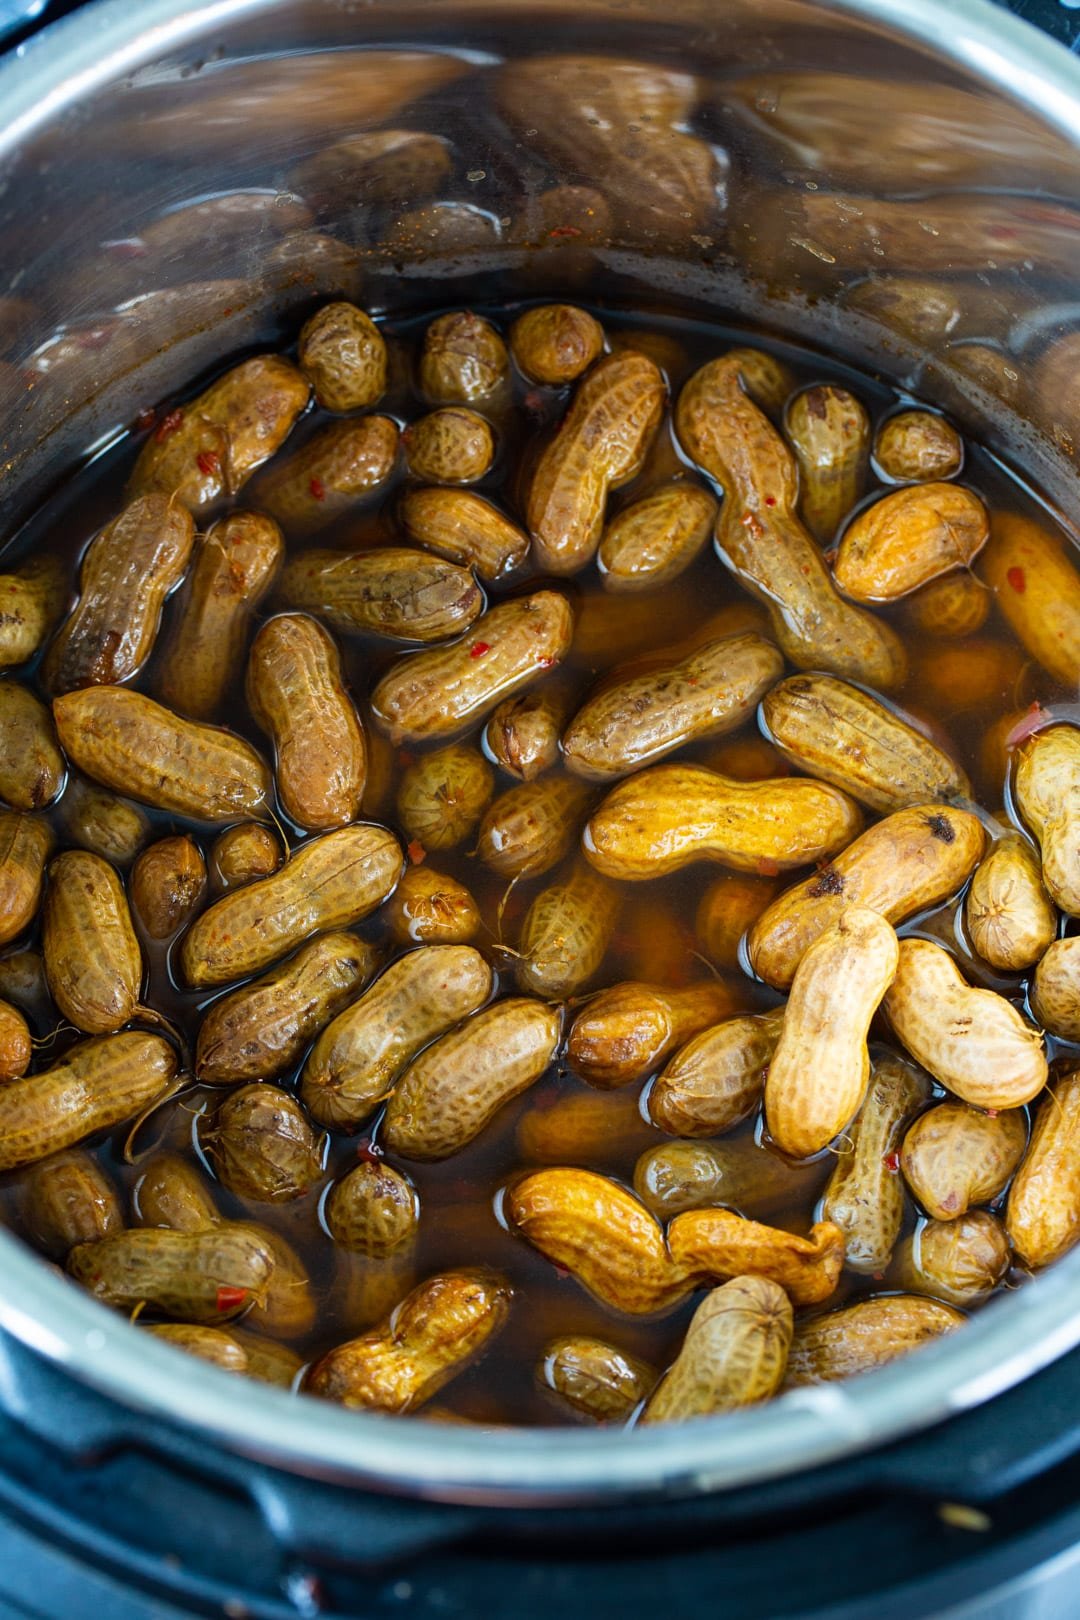 Boiled peanuts in an instant pot.